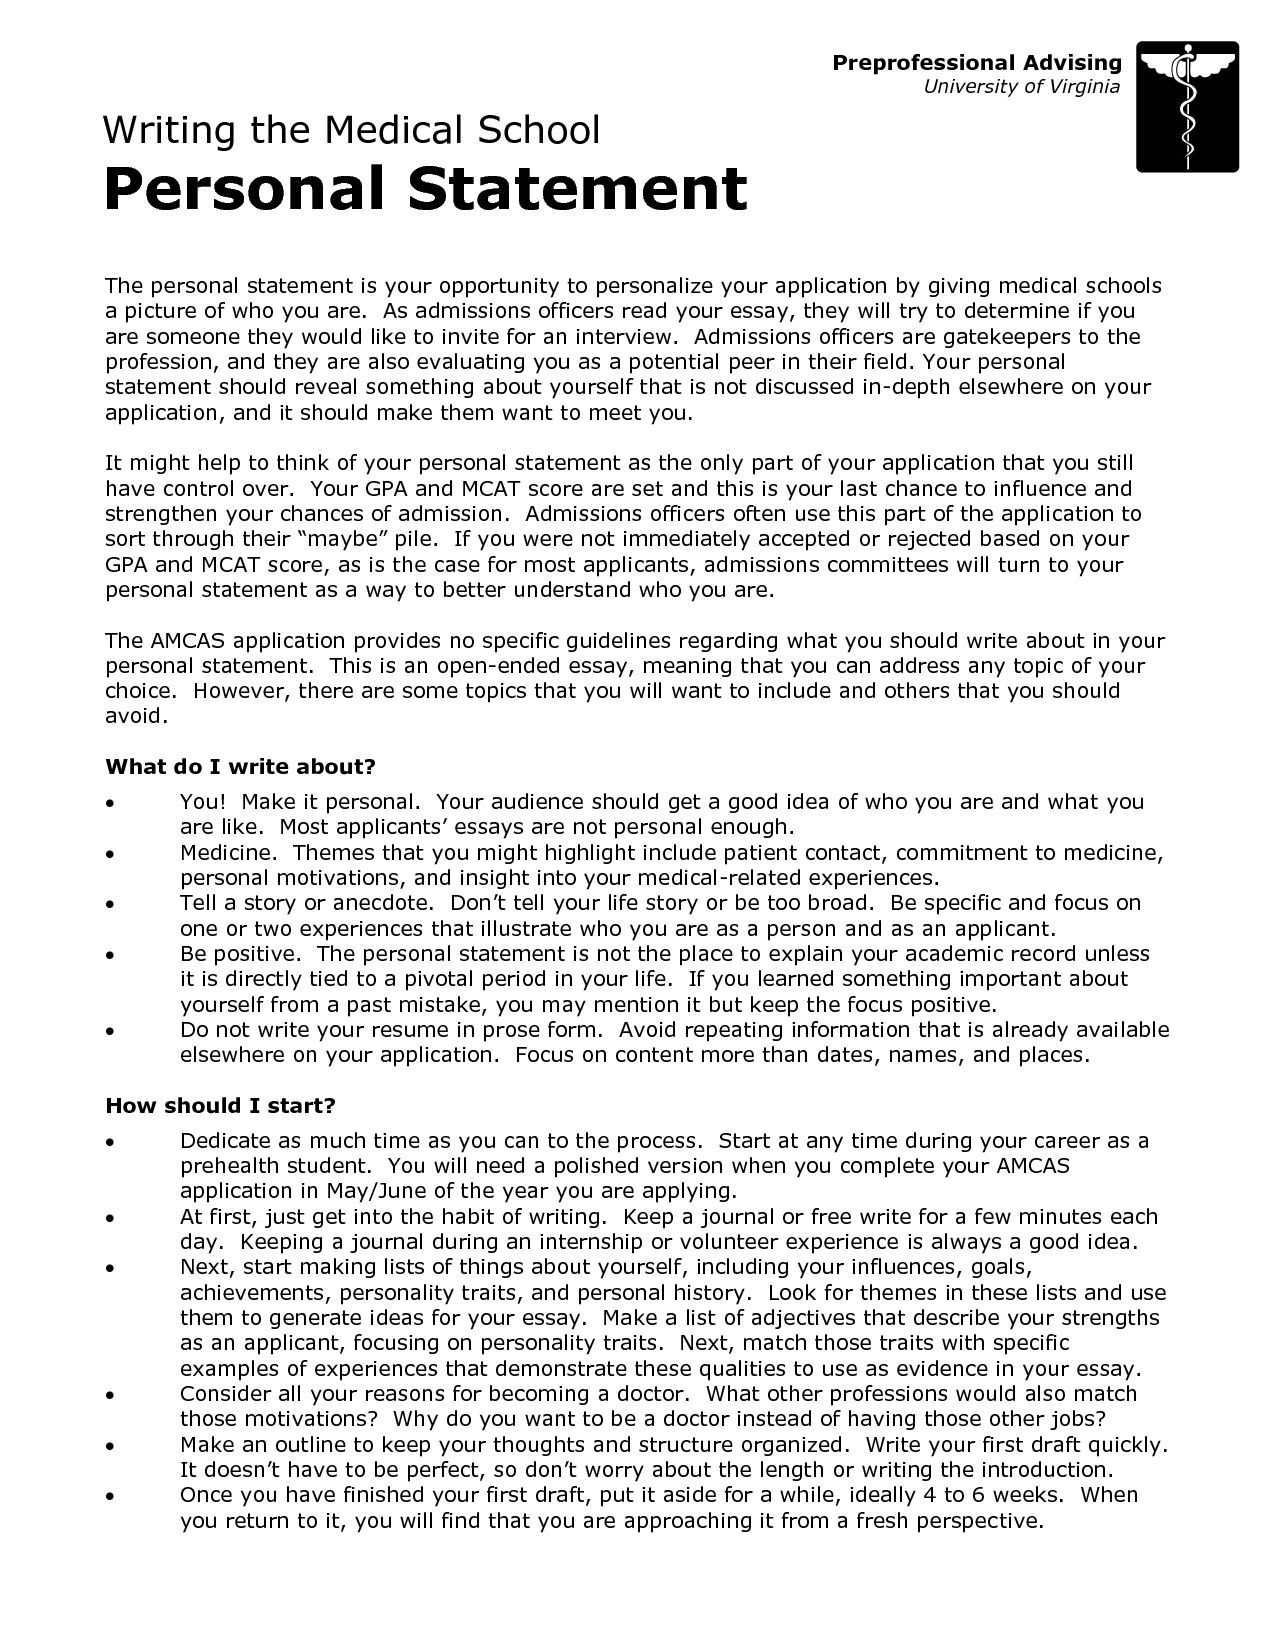 Personal Statement and Admissions Essay Editing - SOS Admissions